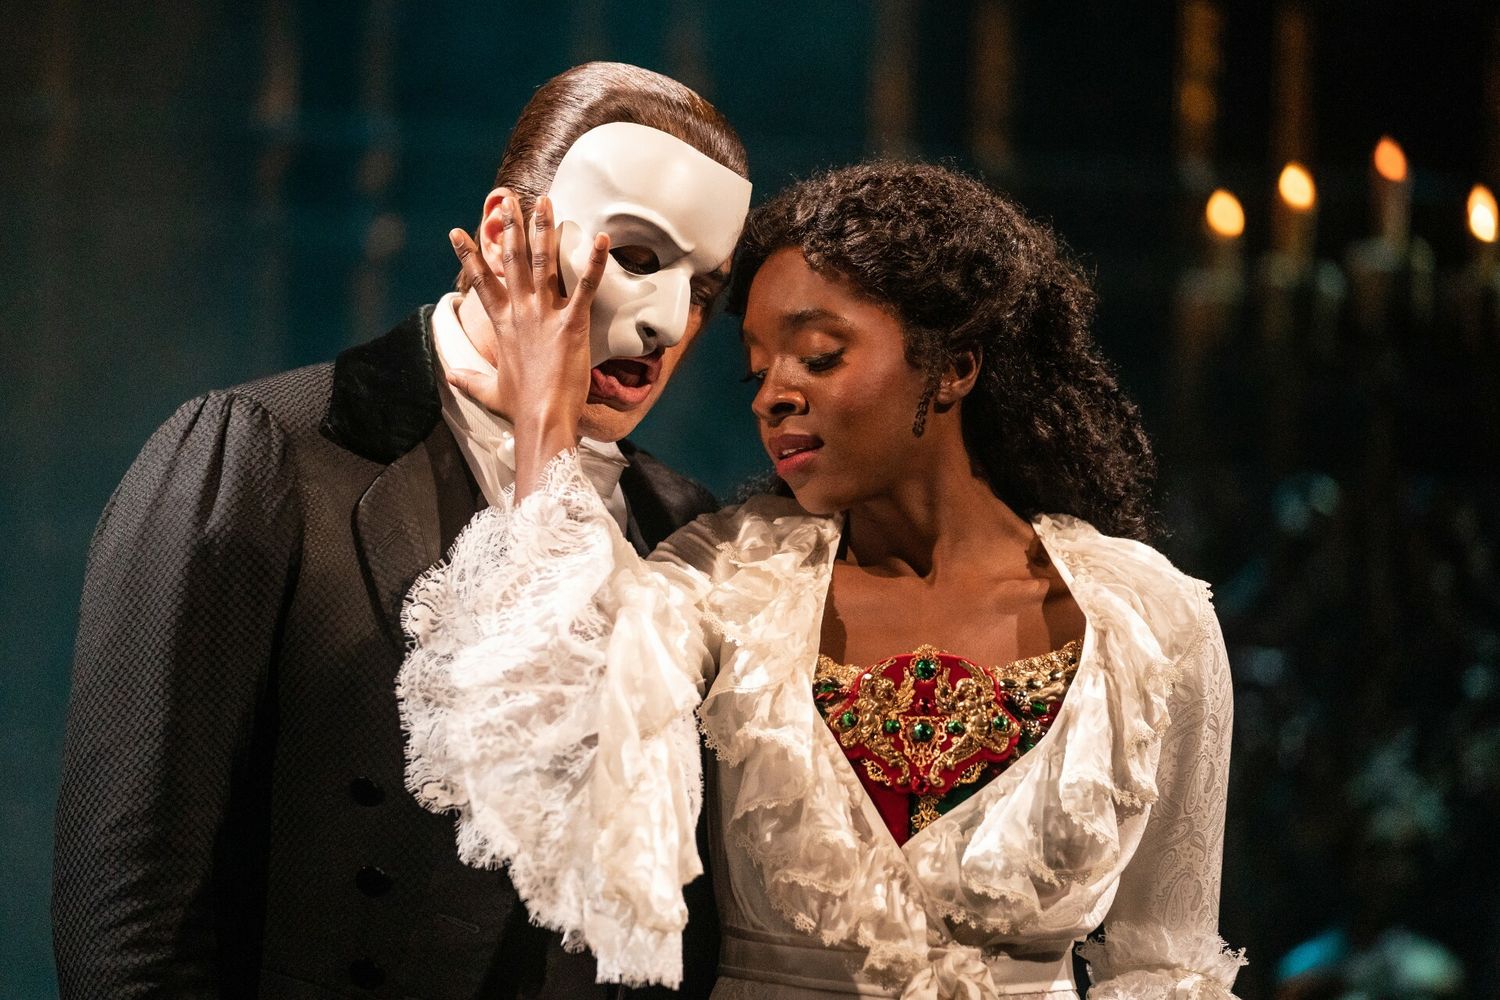 What Theatre Is Phantom Of The Opera In Nyc